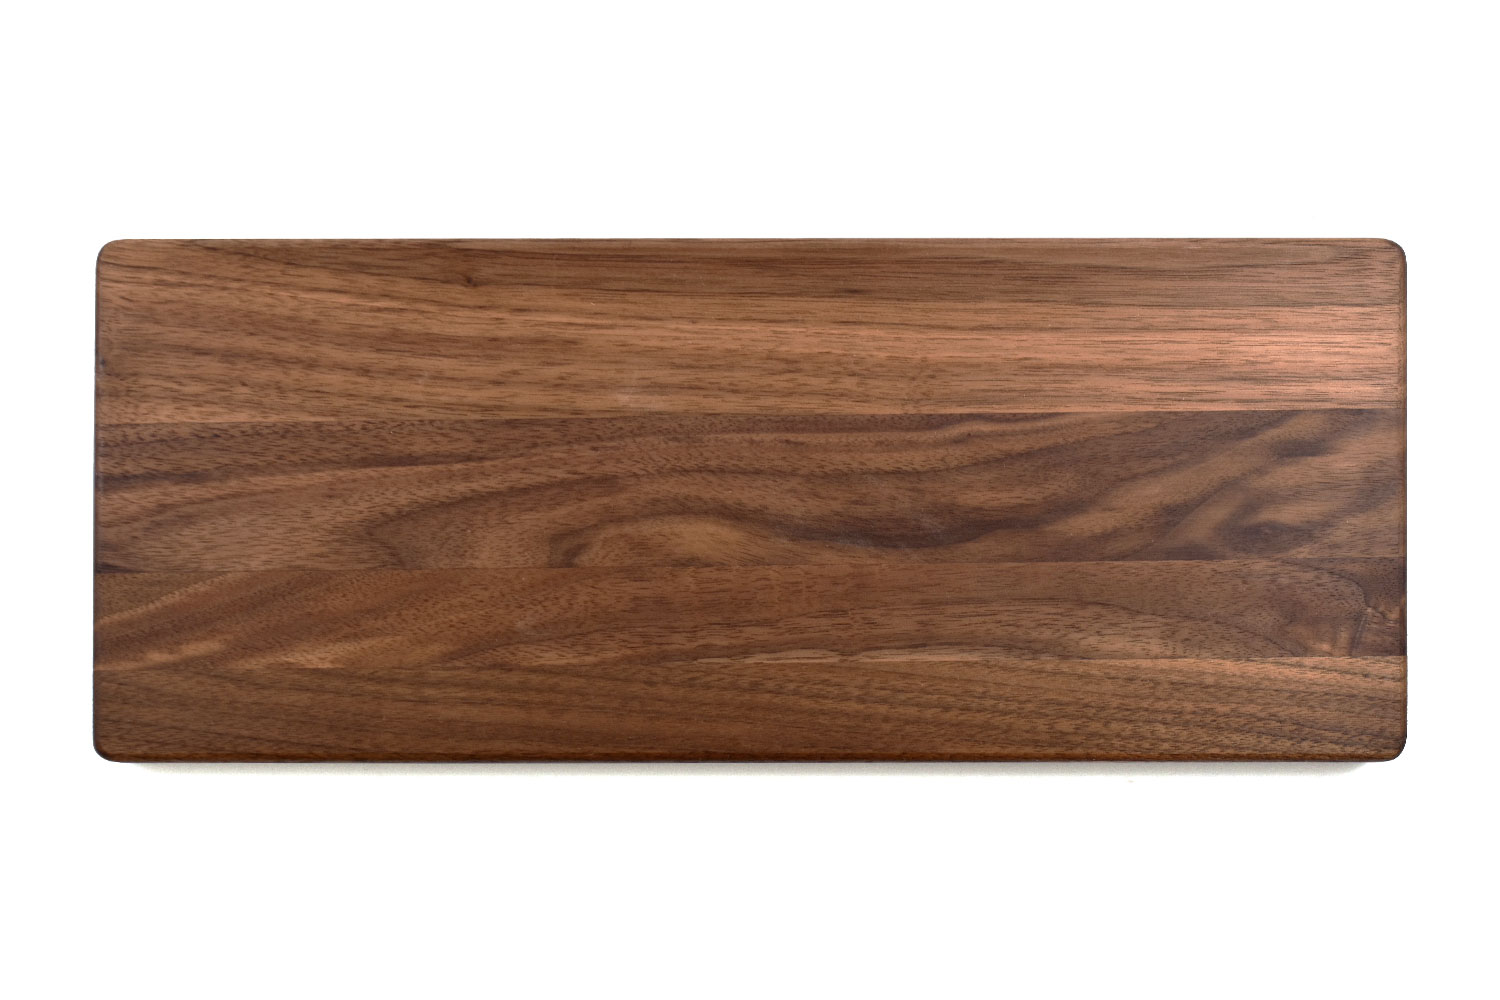 Walnut cheese and serving board with rounded edges